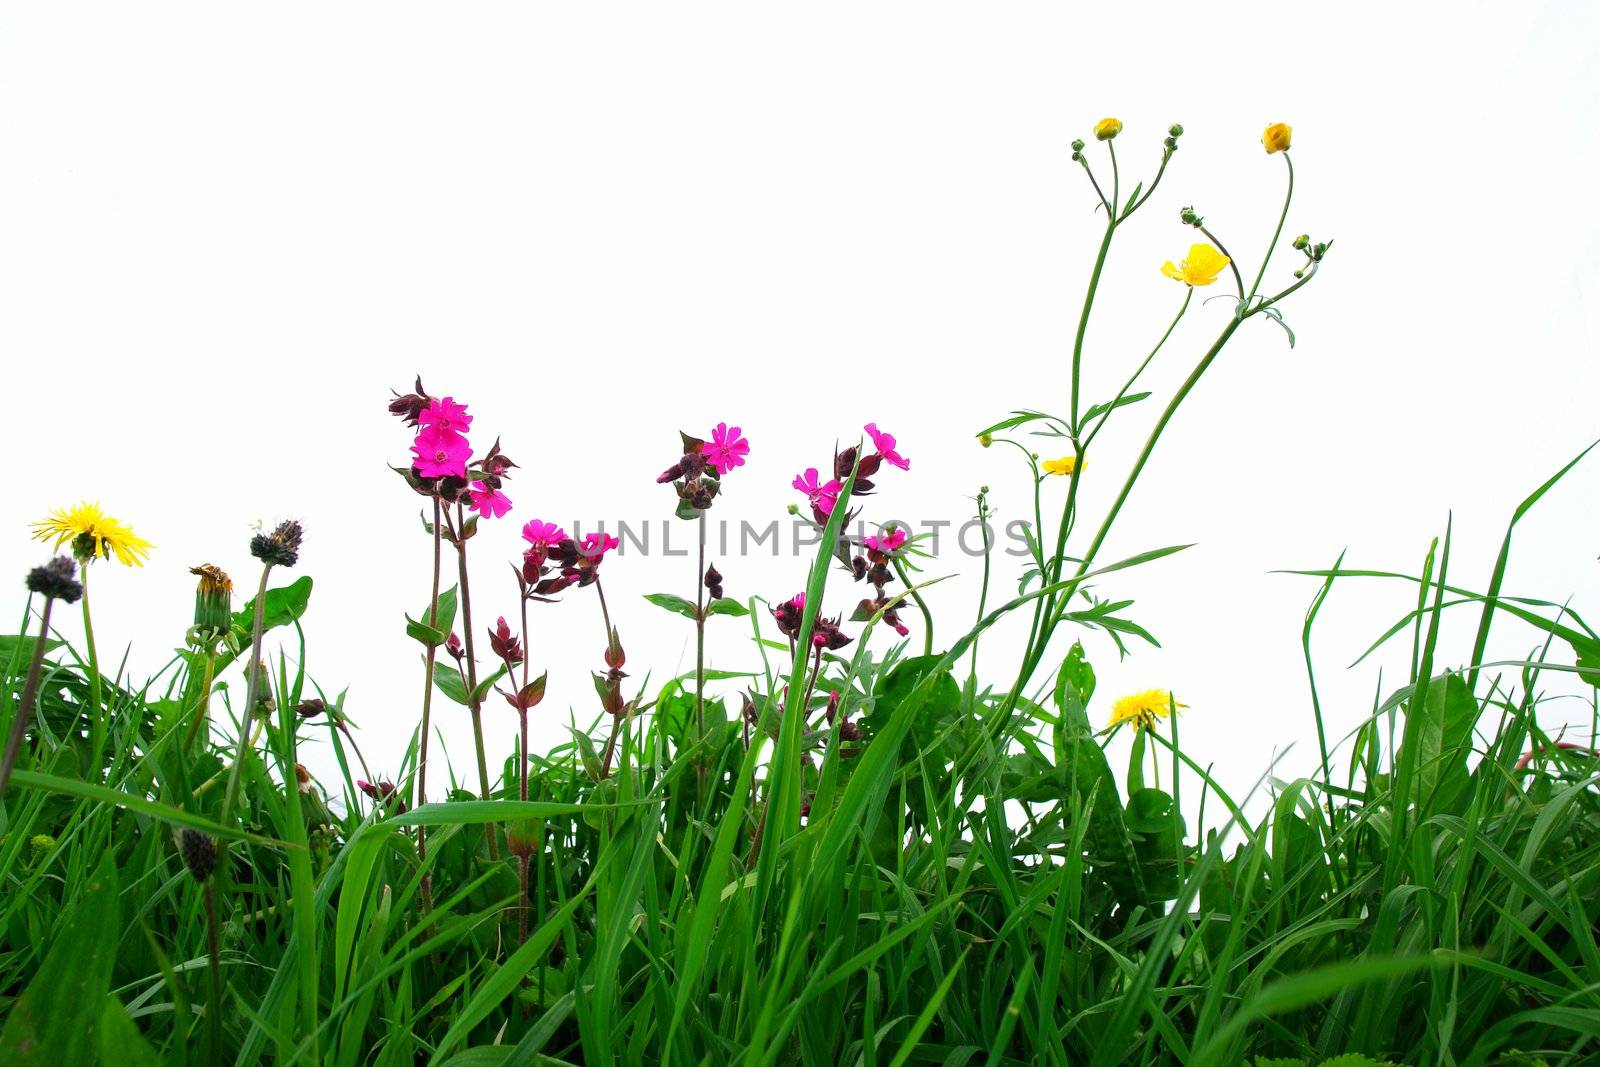 Flowers on a field against an isolated background